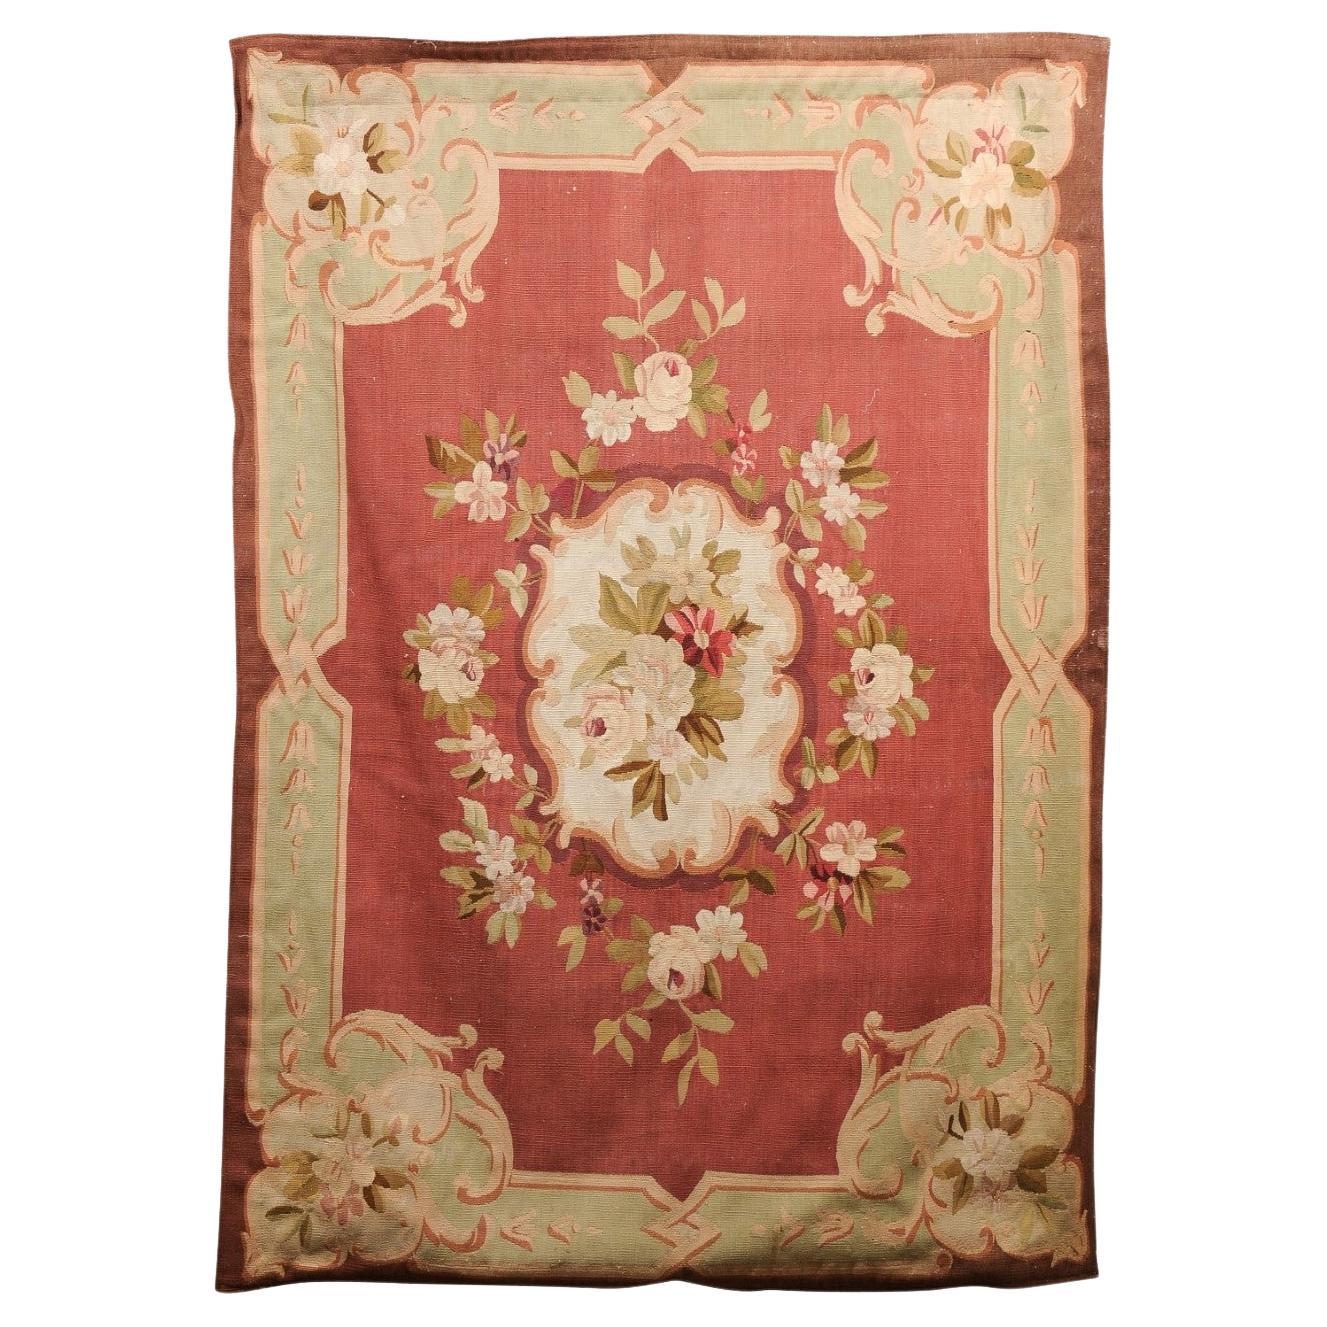 French 19th Century Red and Soft Green Aubusson Tapestry with Floral Décor